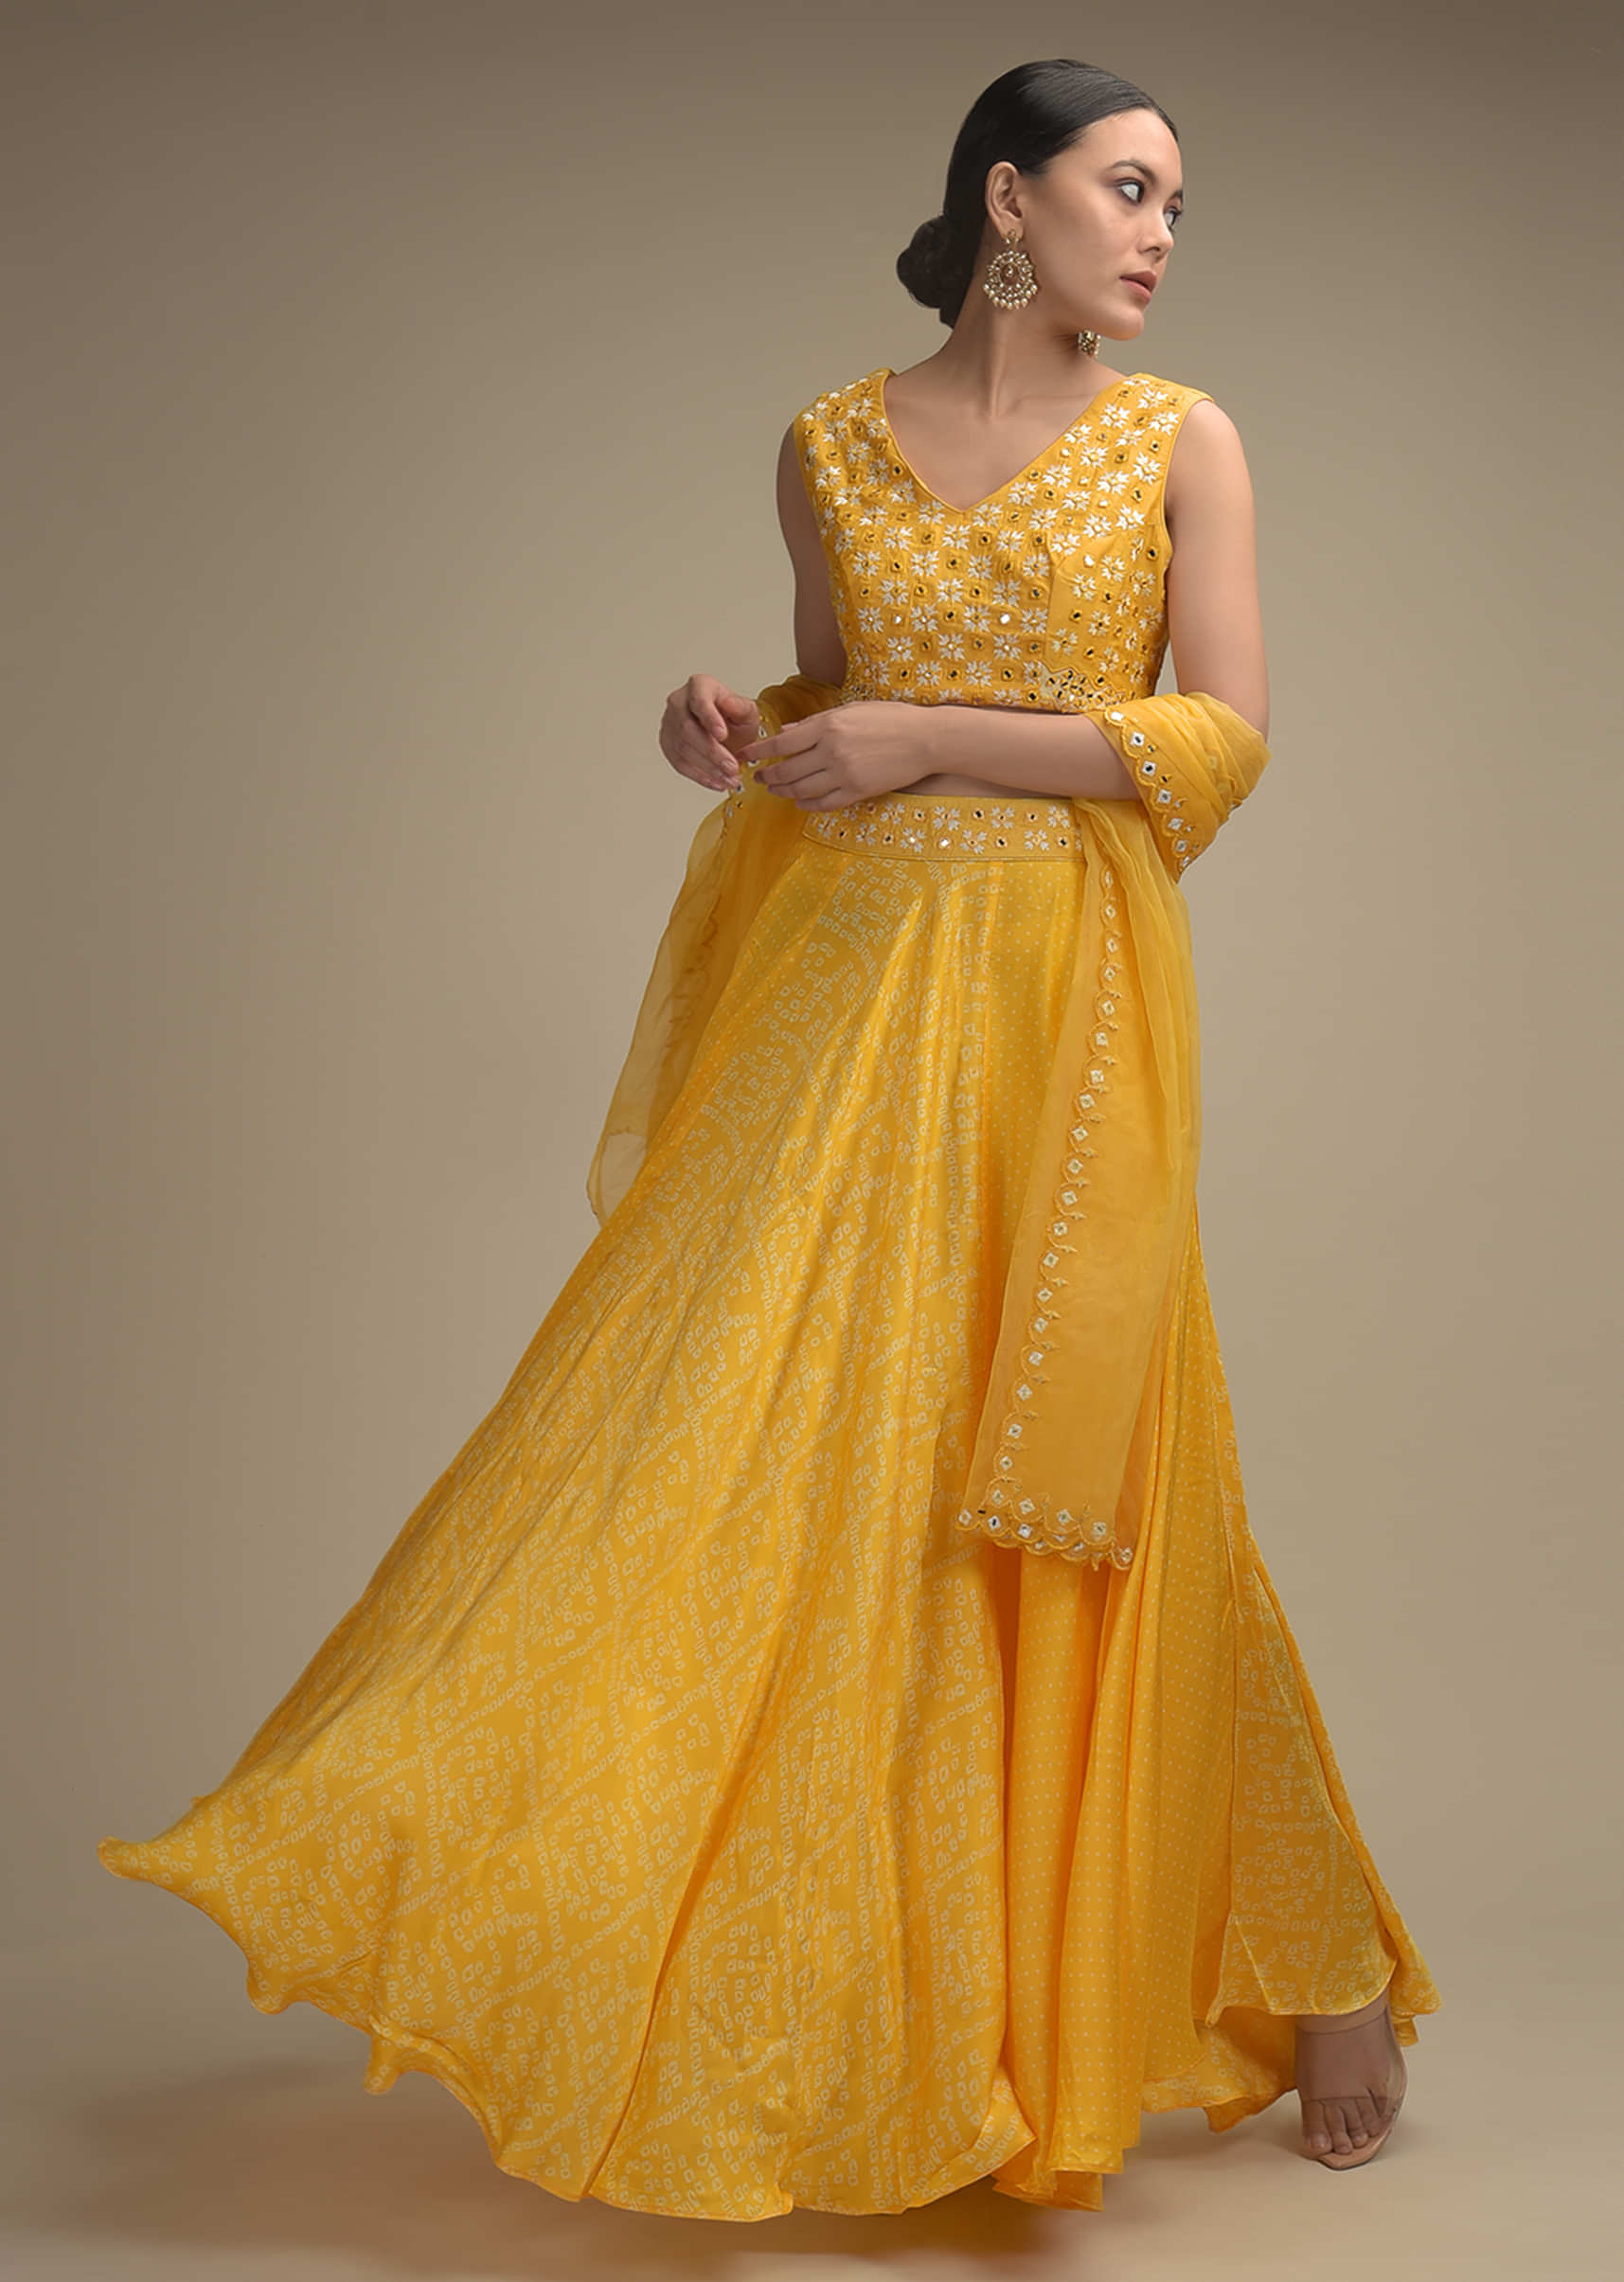 Daffodil Yellow Skirt In Satin Blend With Bandhani Print And Abla Embroidered Crop Top 